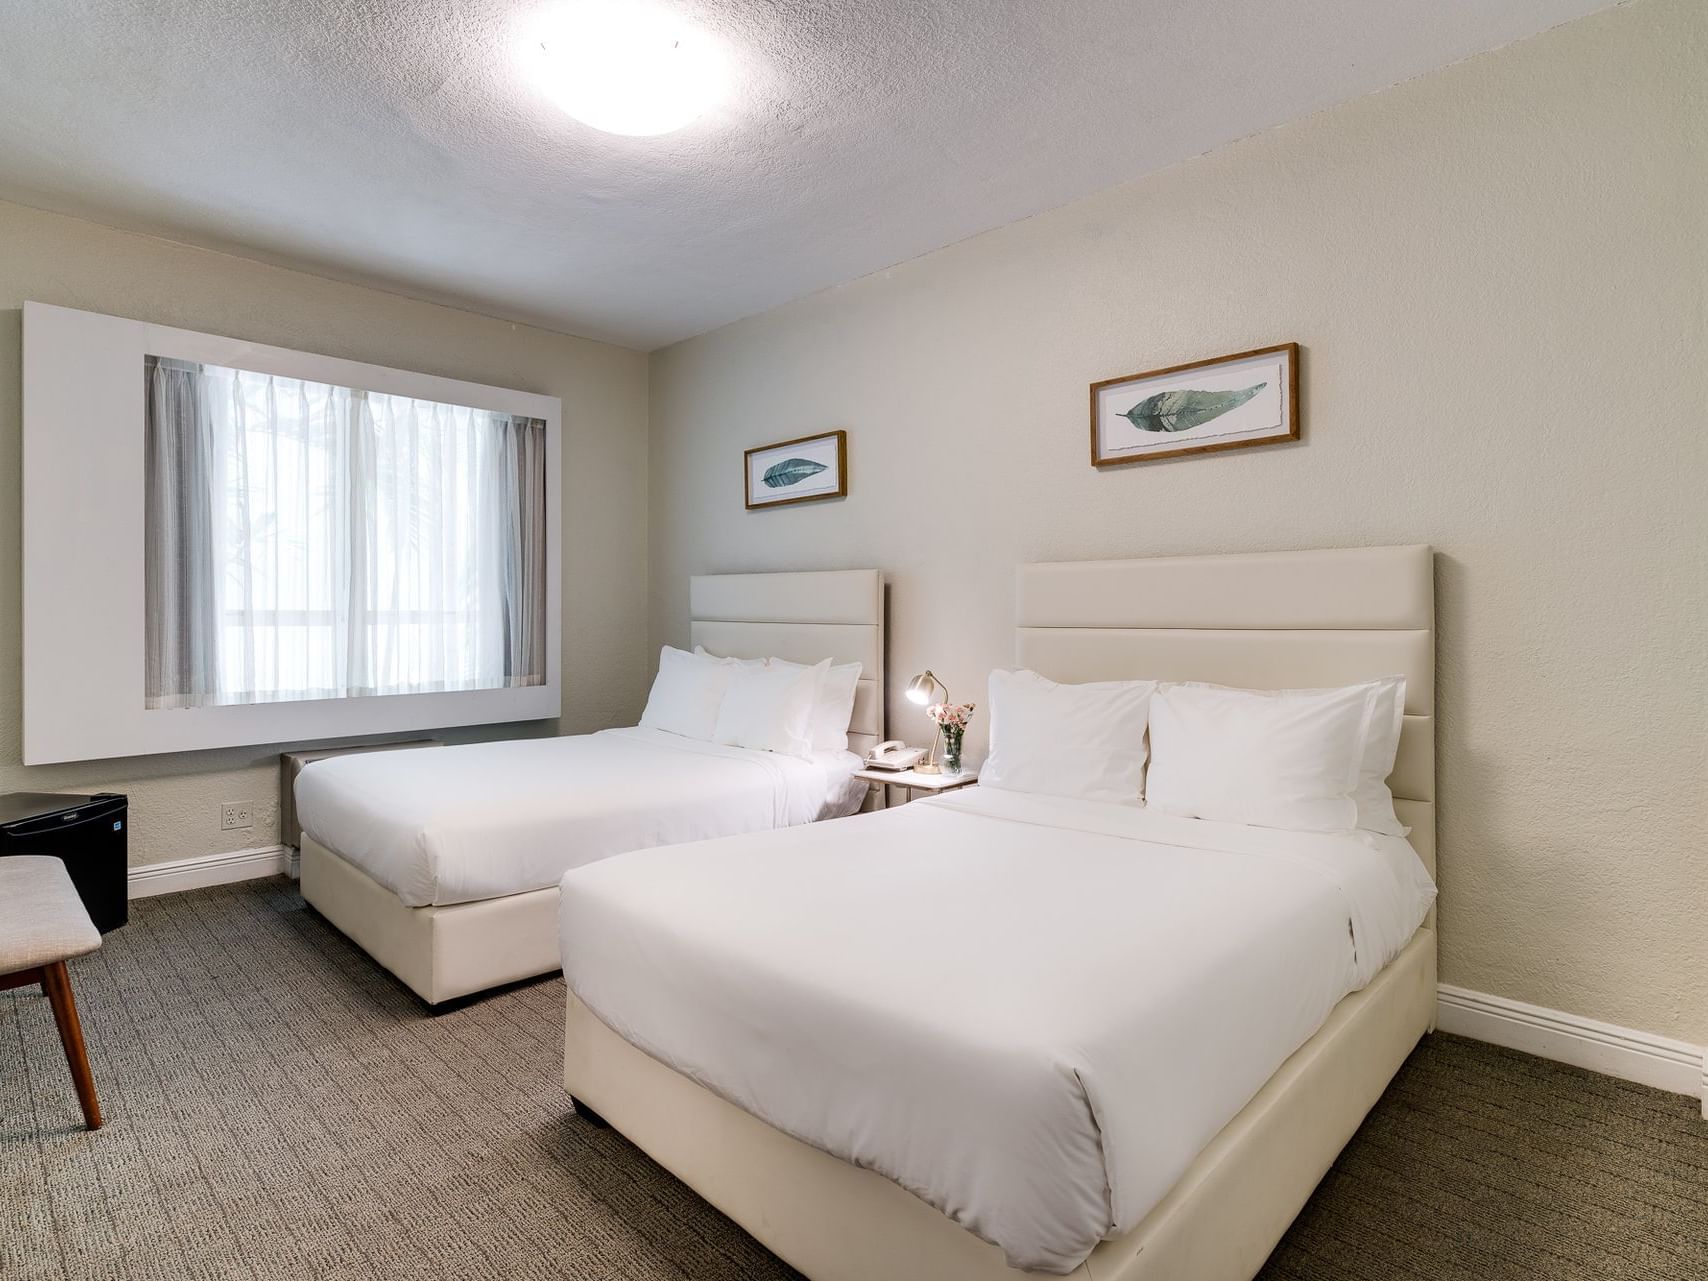 Standard Double room with twin beds at Crest Hotel Suites